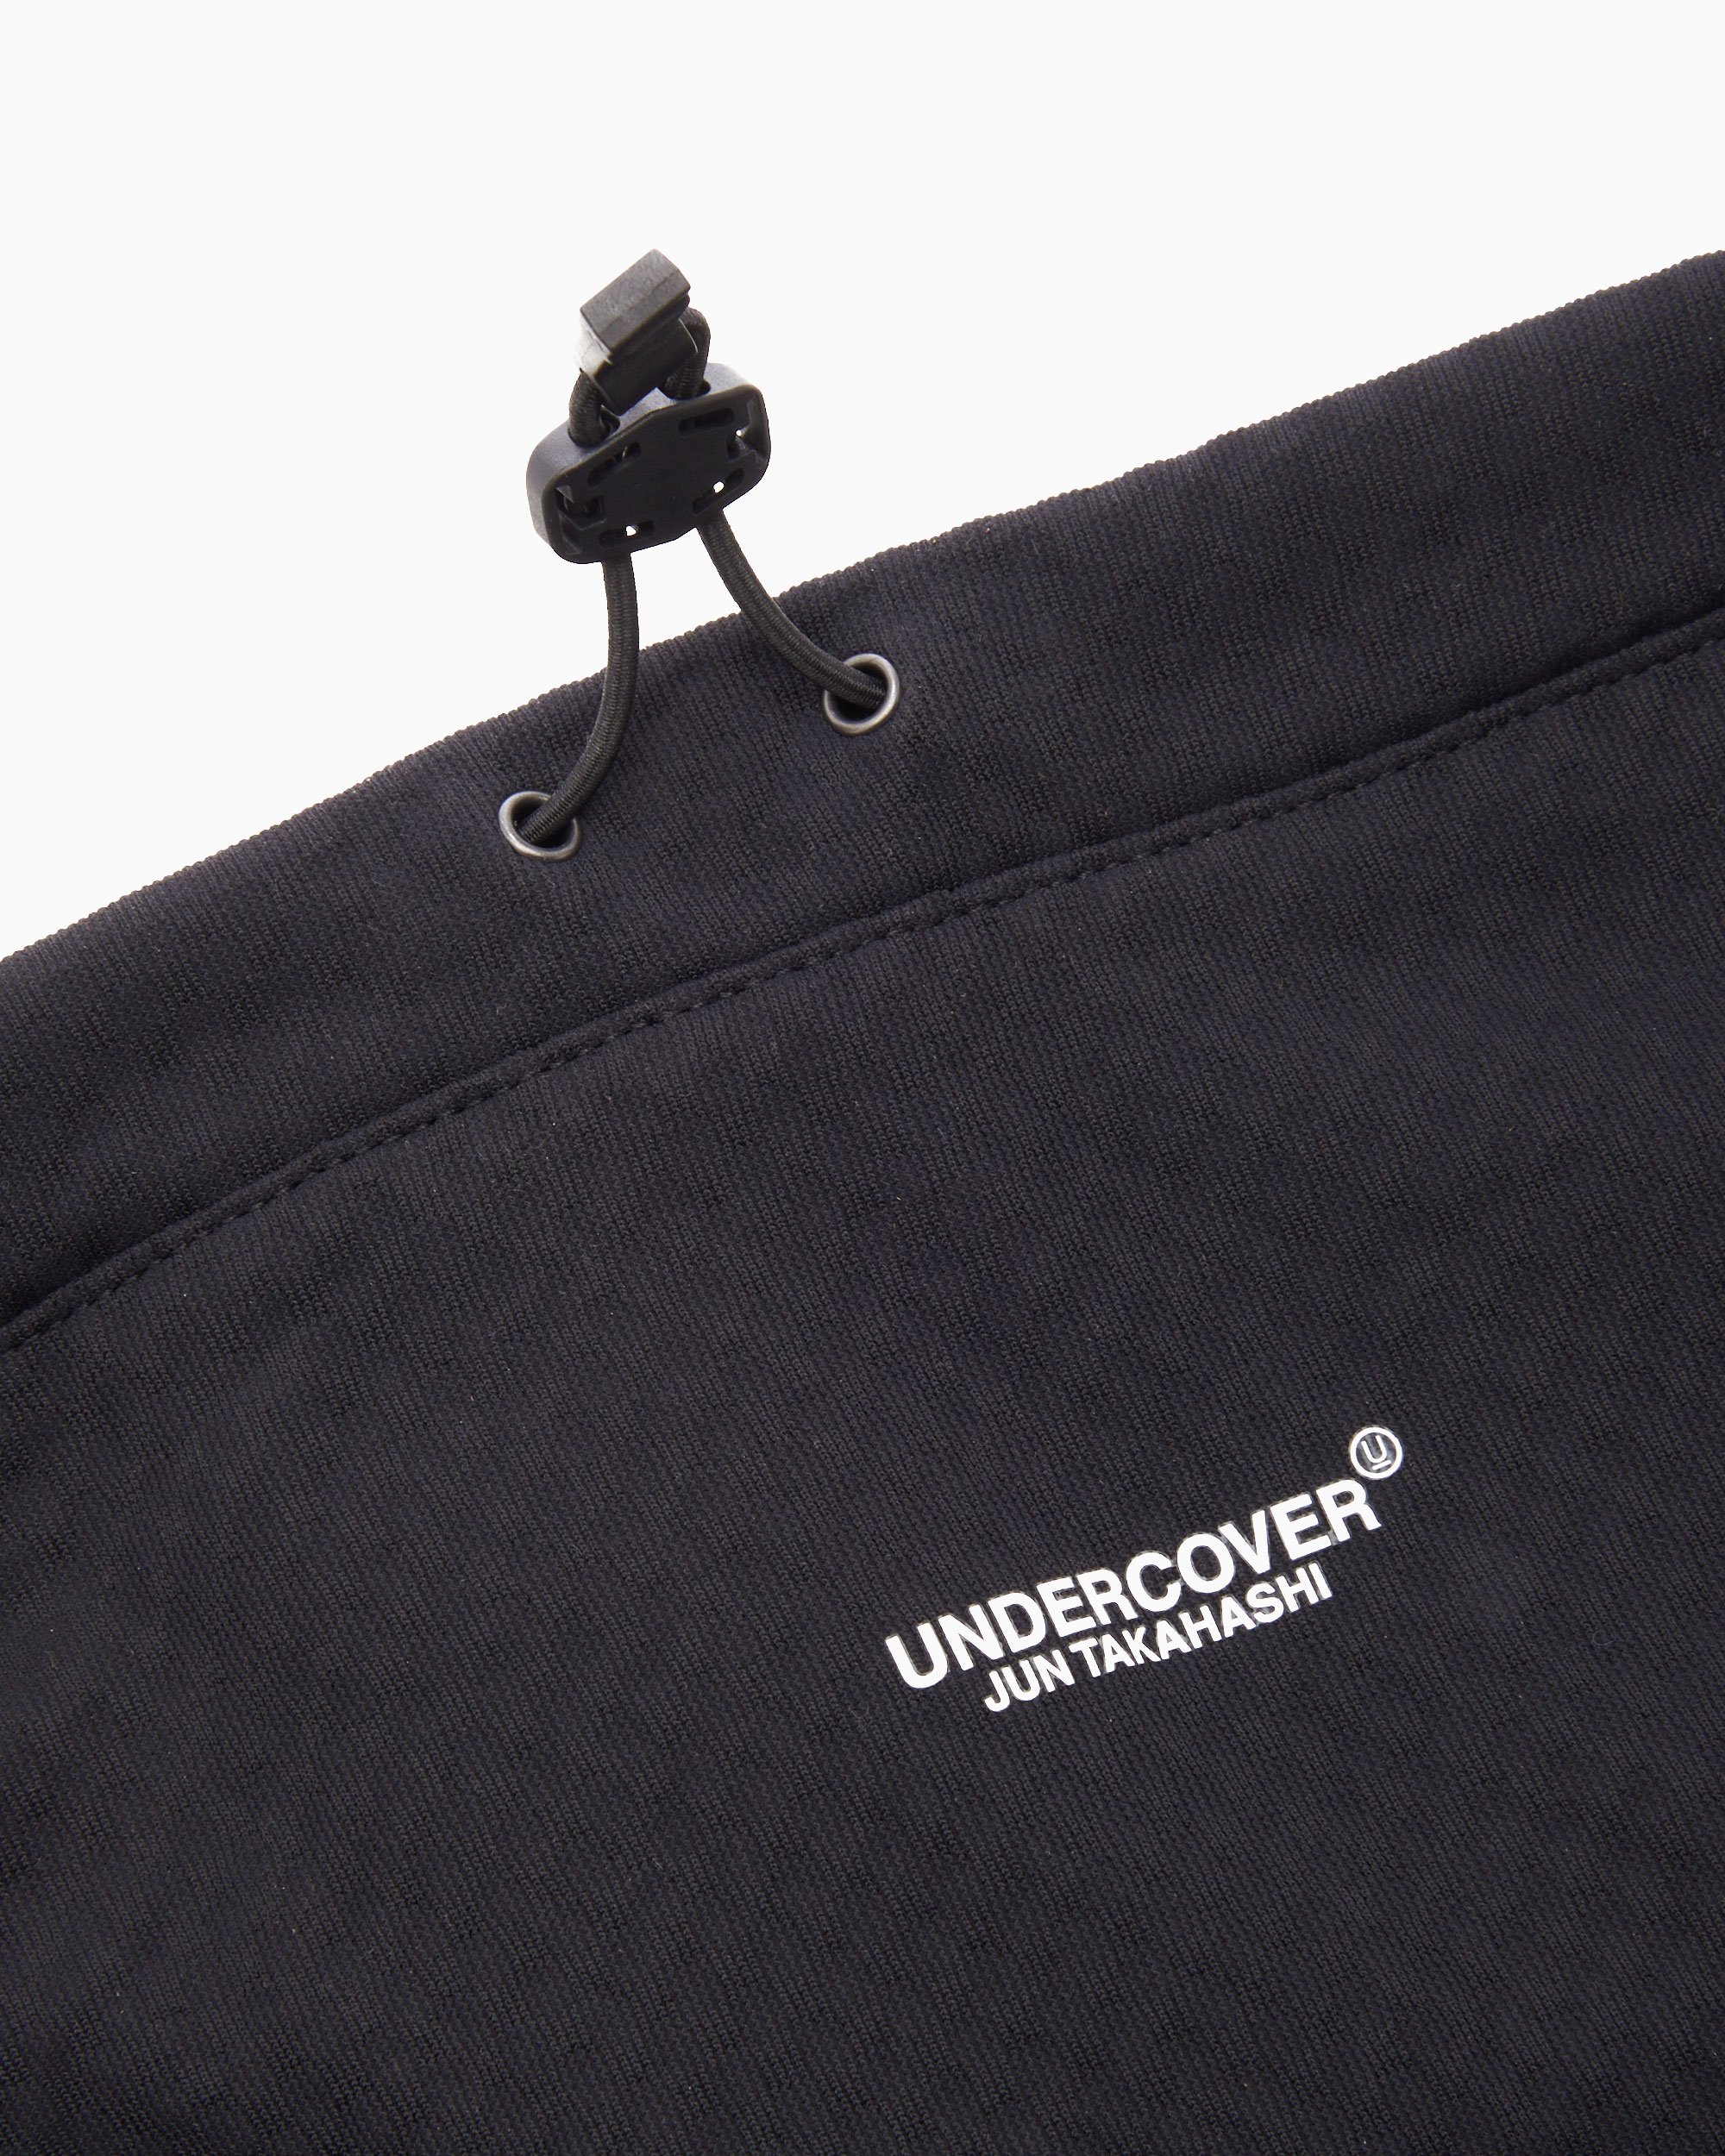 The North Face x Undercover Soukuu Unisex Neck Warmer Black 